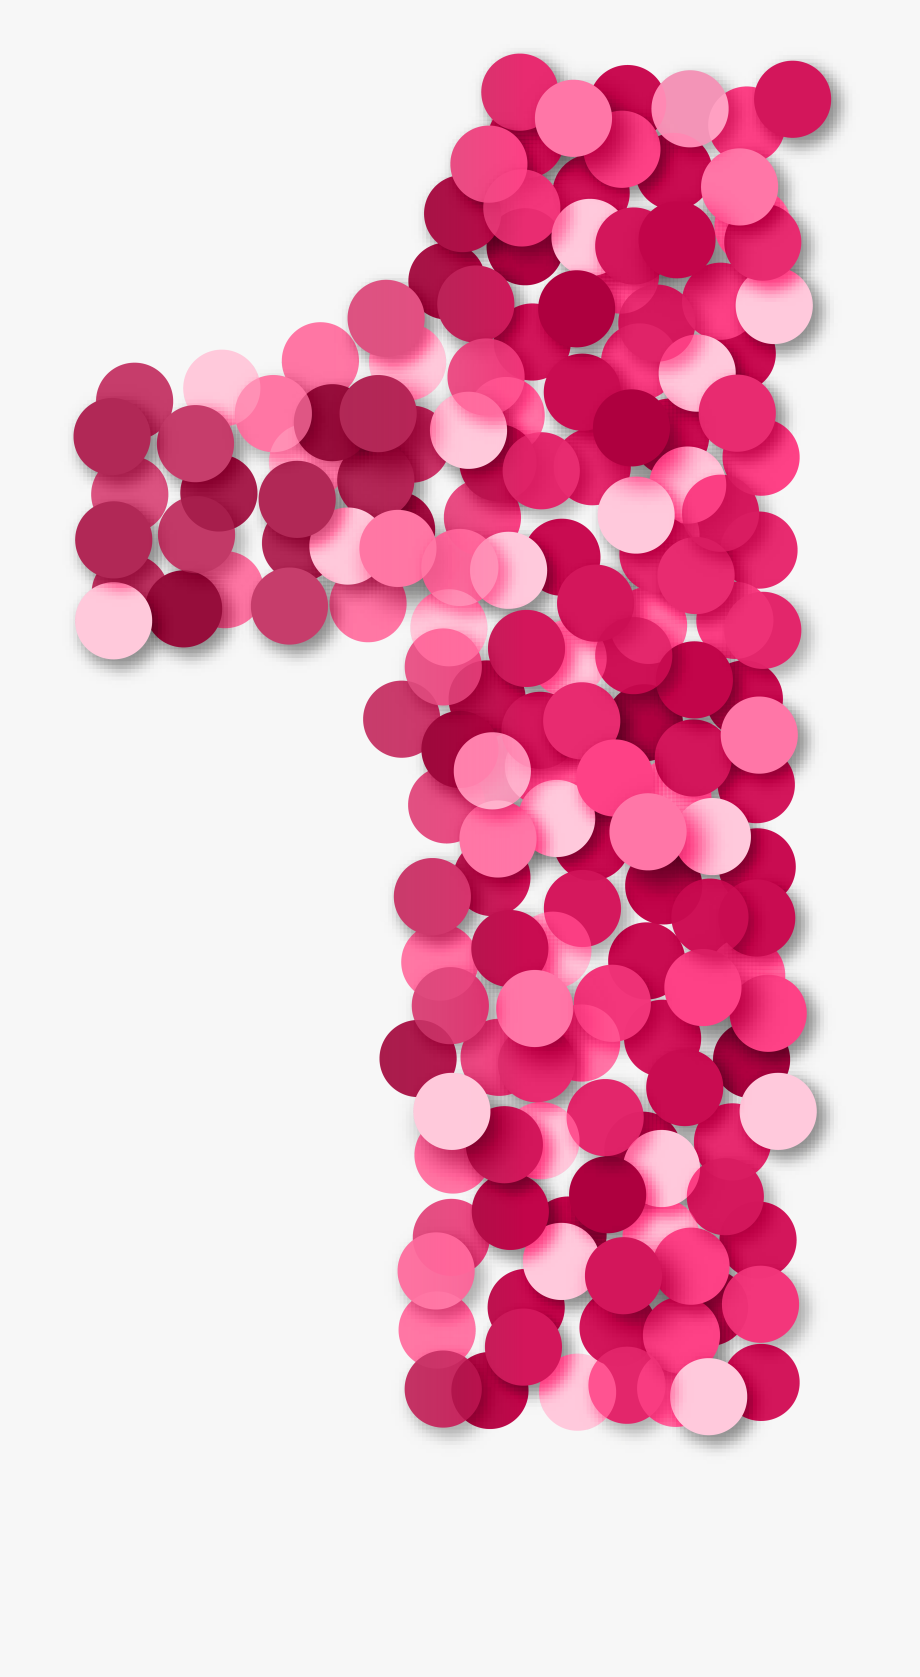 Numbers Clipart Pink and other clipart images on Cliparts pub™